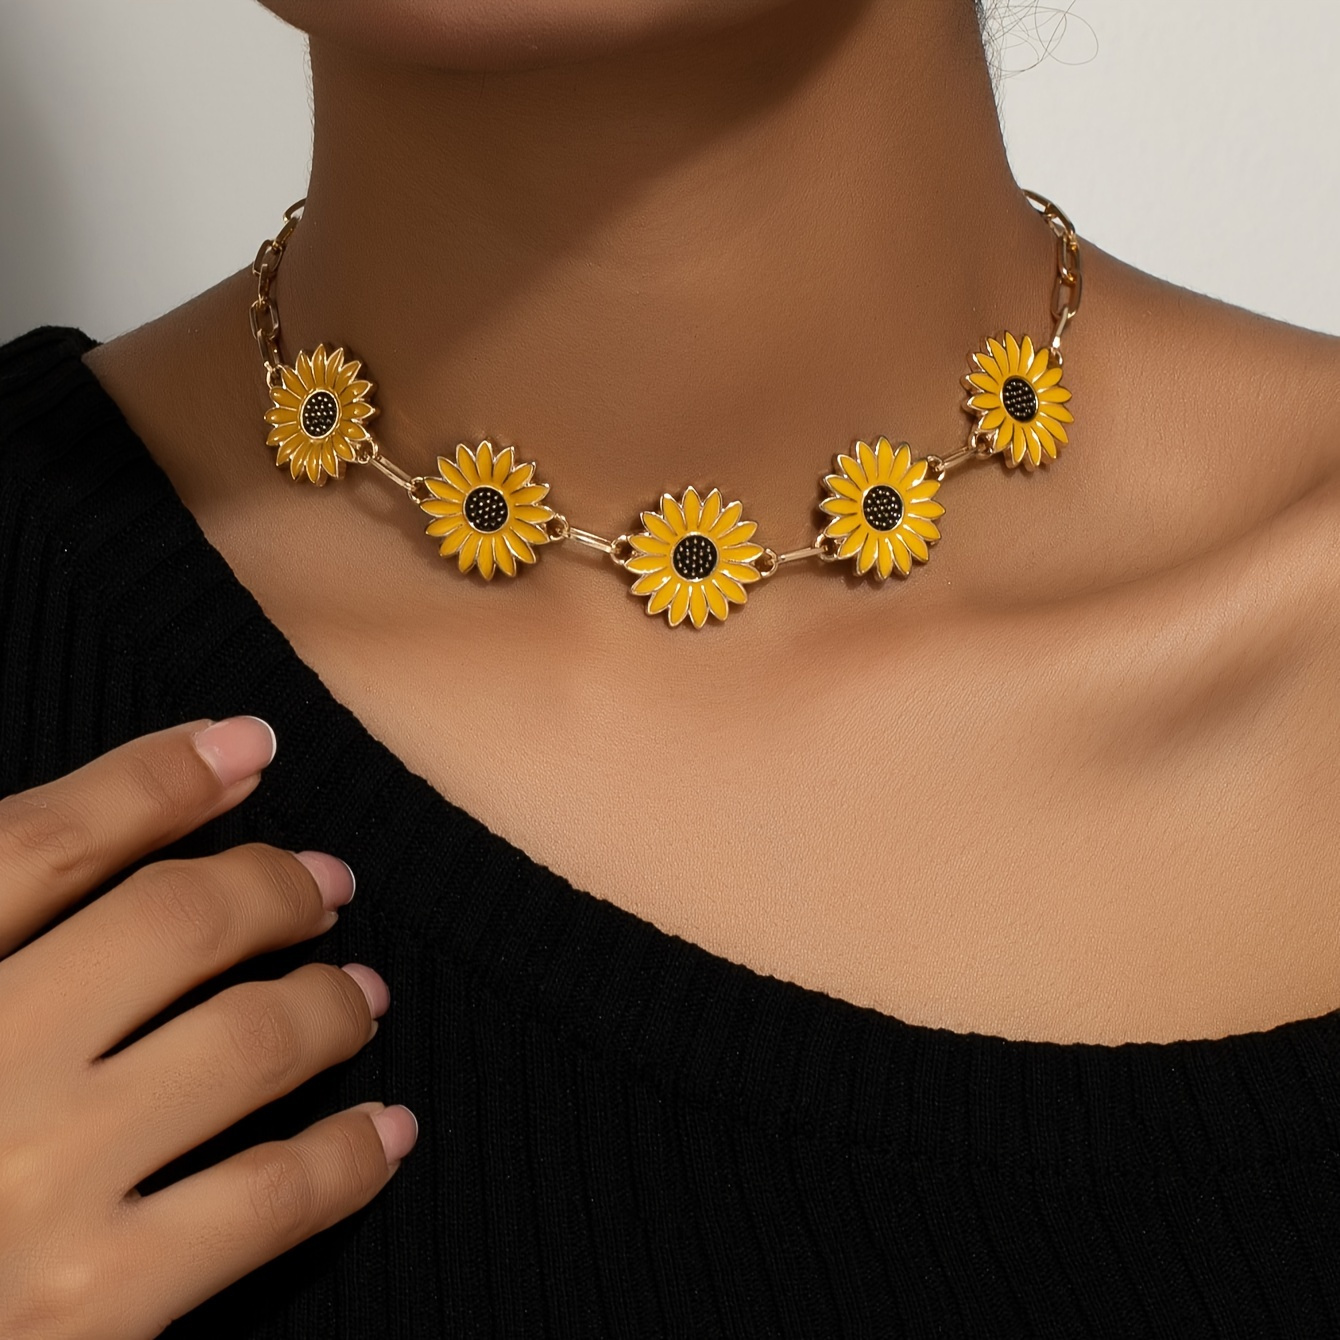 

Exquisite Enamel Sunflower Decor Choker Pendant Necklace Cute Vacation Style Zinc Alloy Jewelry Holiday Necklace